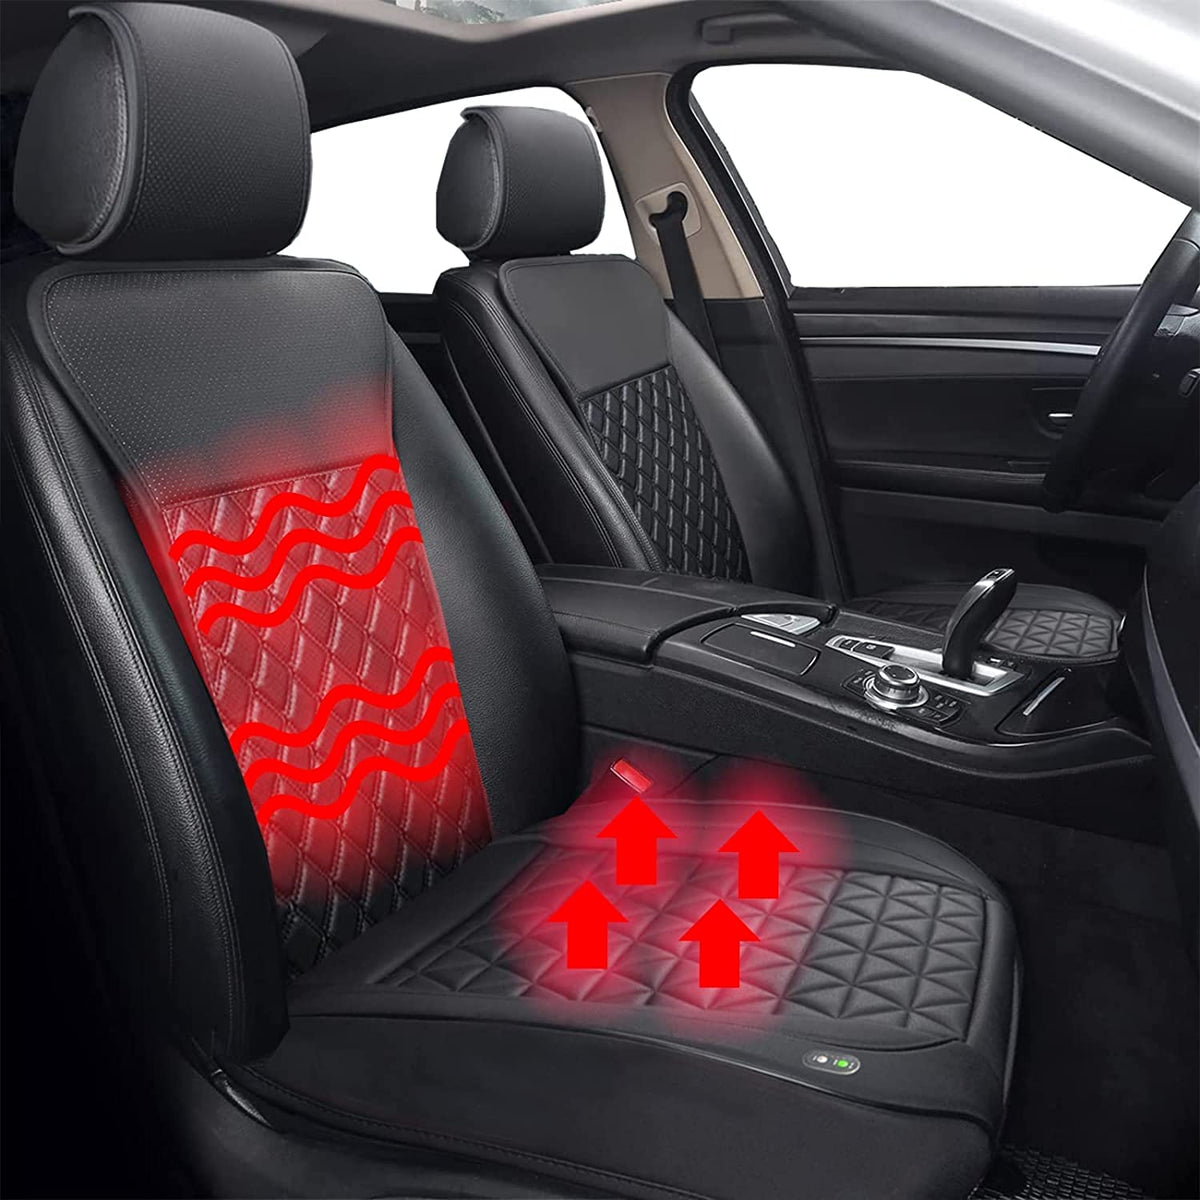 Heated Seat Cushion, 12V/24V Universal Car Heated Seat Cushion, Soft Warm  Seat Covers for Full Back and Seat, Suitable for Car Truck in Winter 